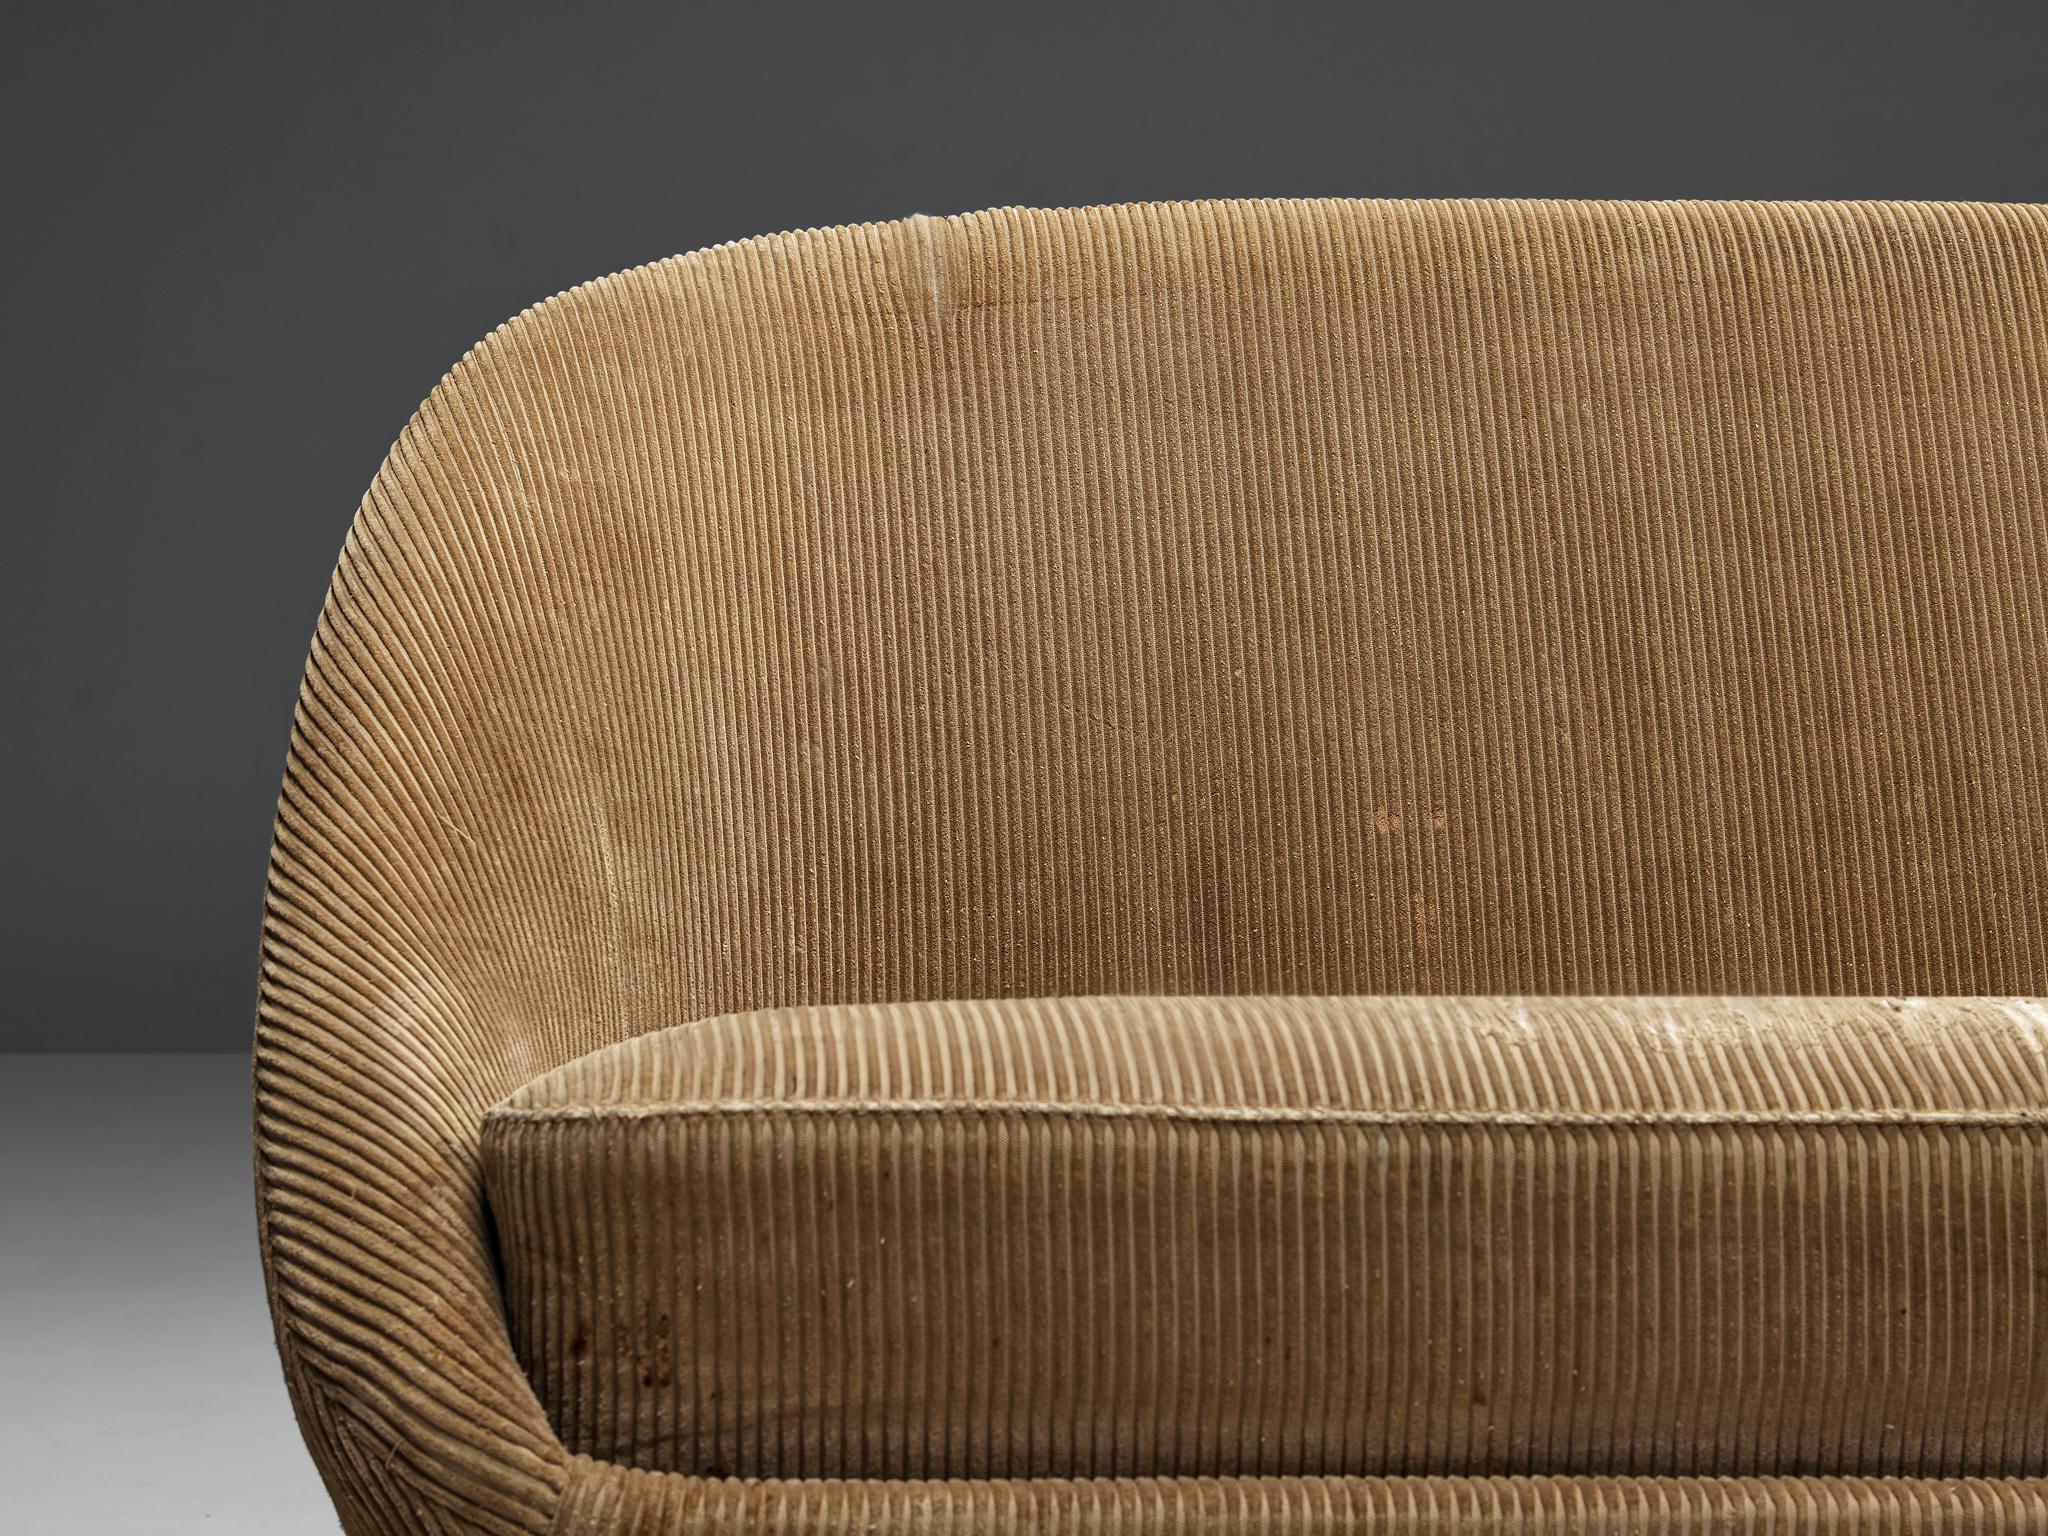 Theo Ruth for Artifort Sofa in Beige Corduroy Upholstery